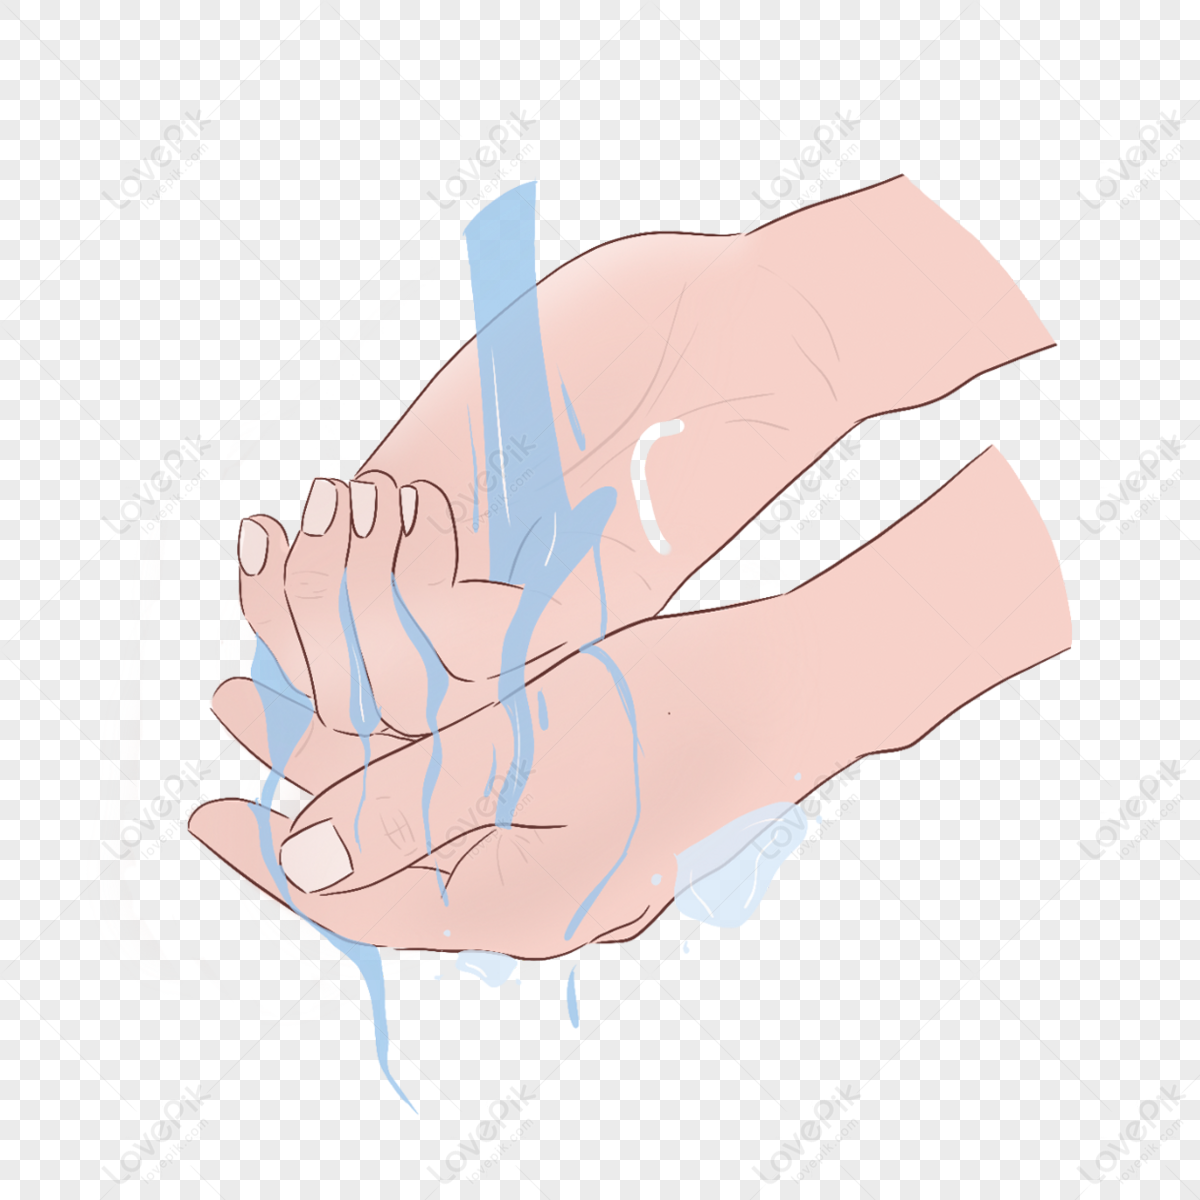 Wash Your Hands. Vector Illustration. Hand Drawing. Hand Washing. Doodle  Style Drawing Stock Illustration - Illustration of poster, disease:  176740773